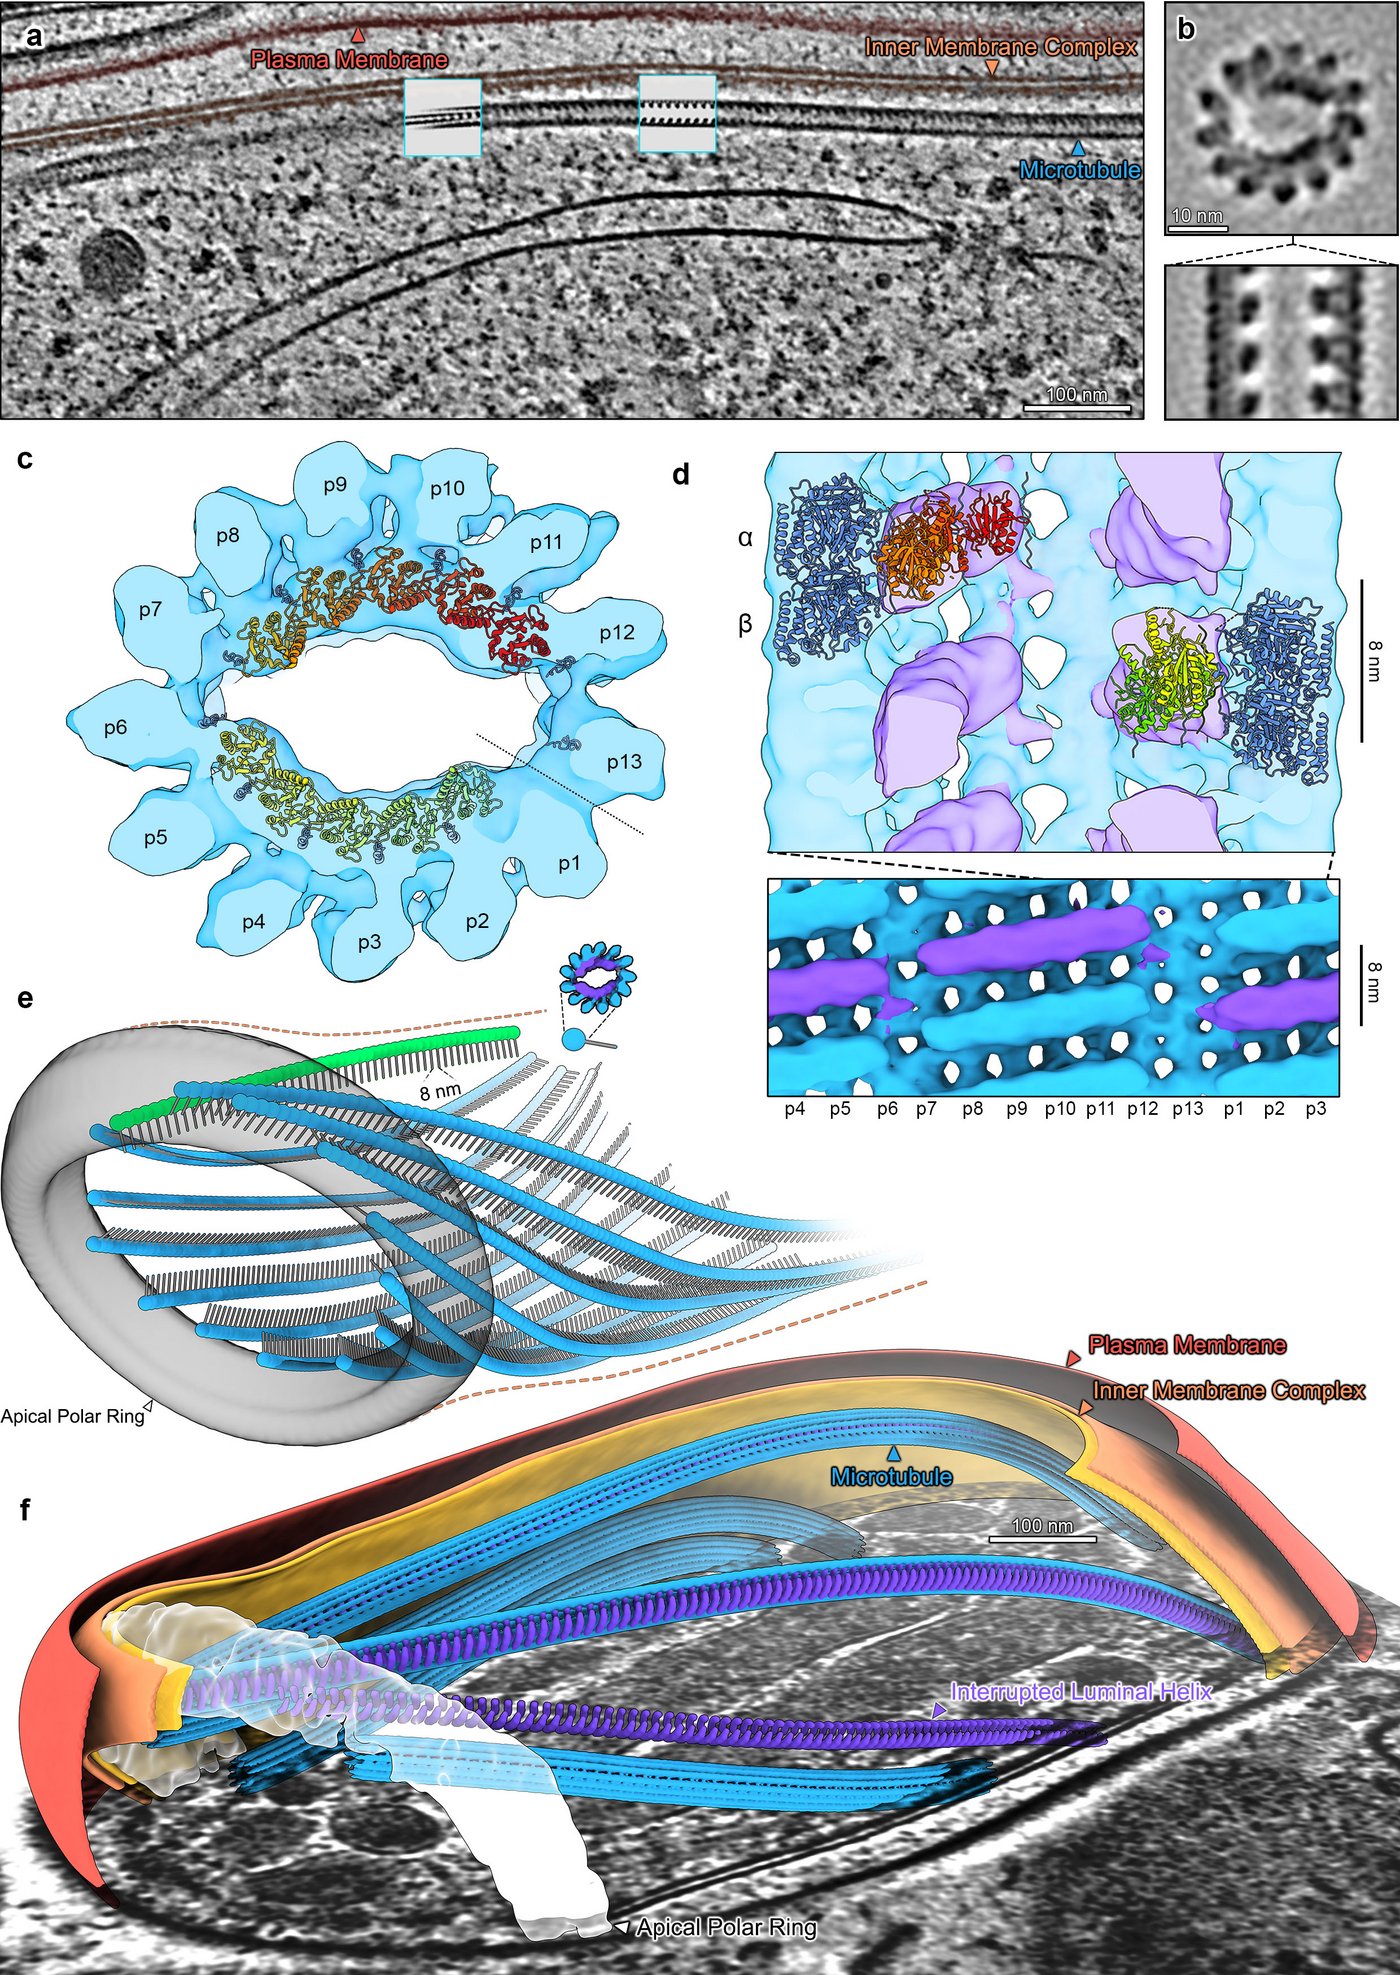 Colourful electron tomographic images:The subpellicular microtubules (SPMT) of sporozoites contain a periodic luminal density within 13 protofilament microtubules.